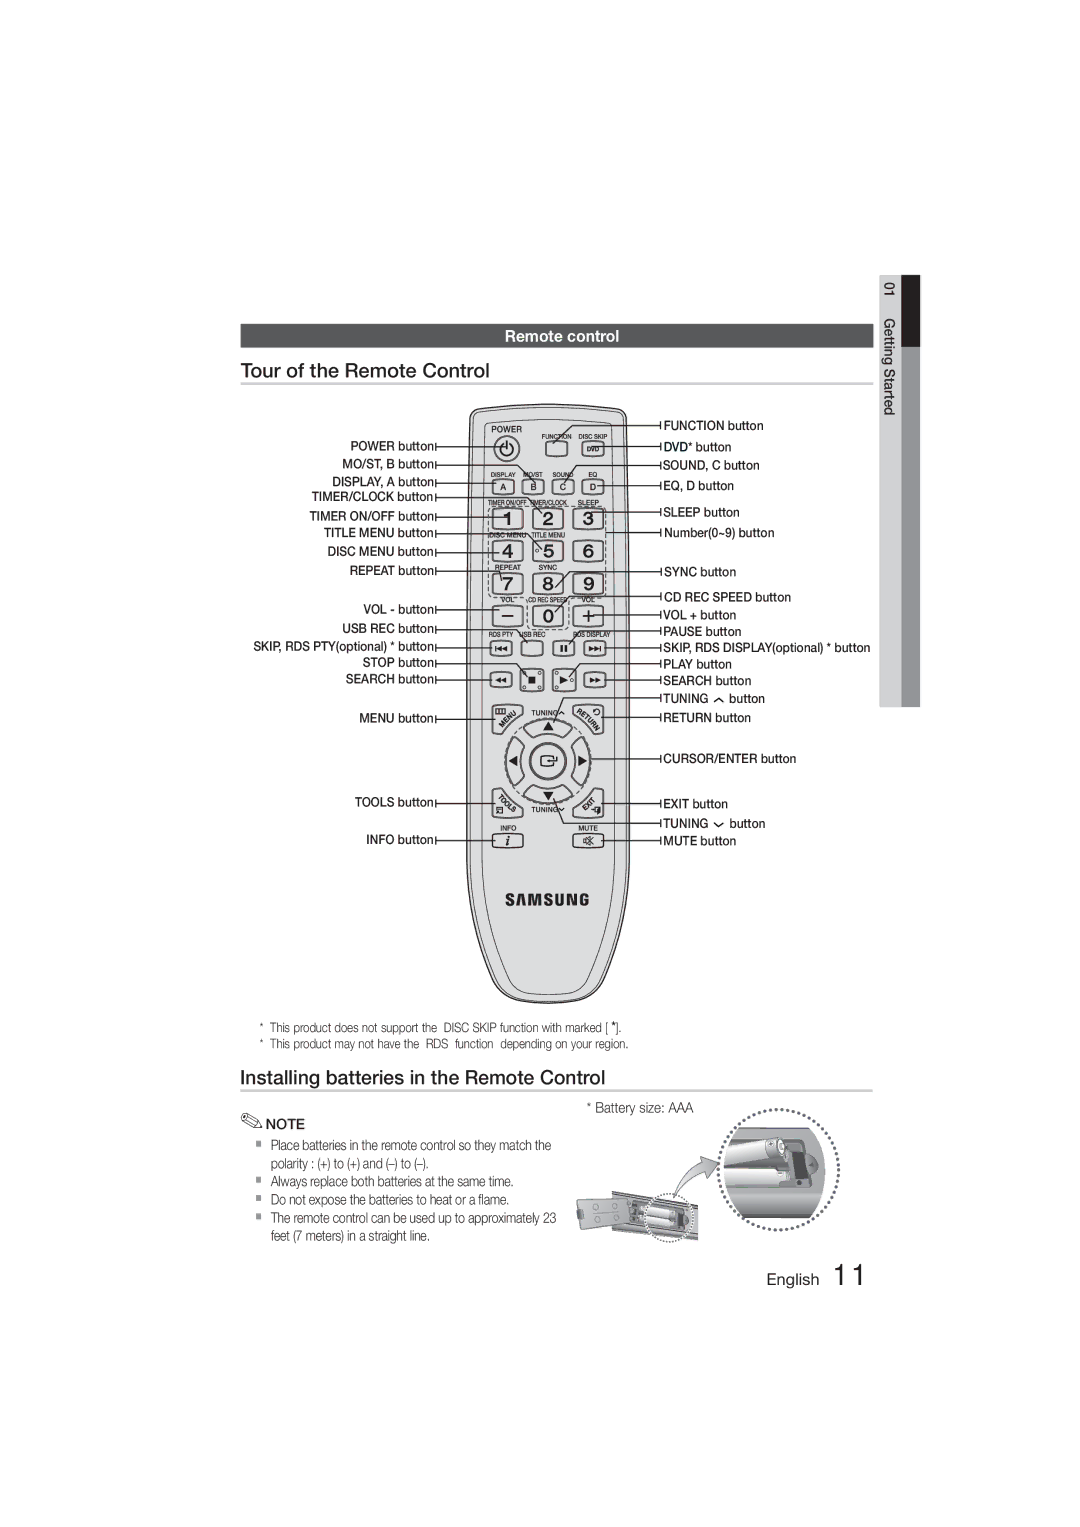 Samsung MM-D470D/XE, MM-D470D/XN Tour of the Remote Control, Installing batteries in the Remote Control, Remote control 